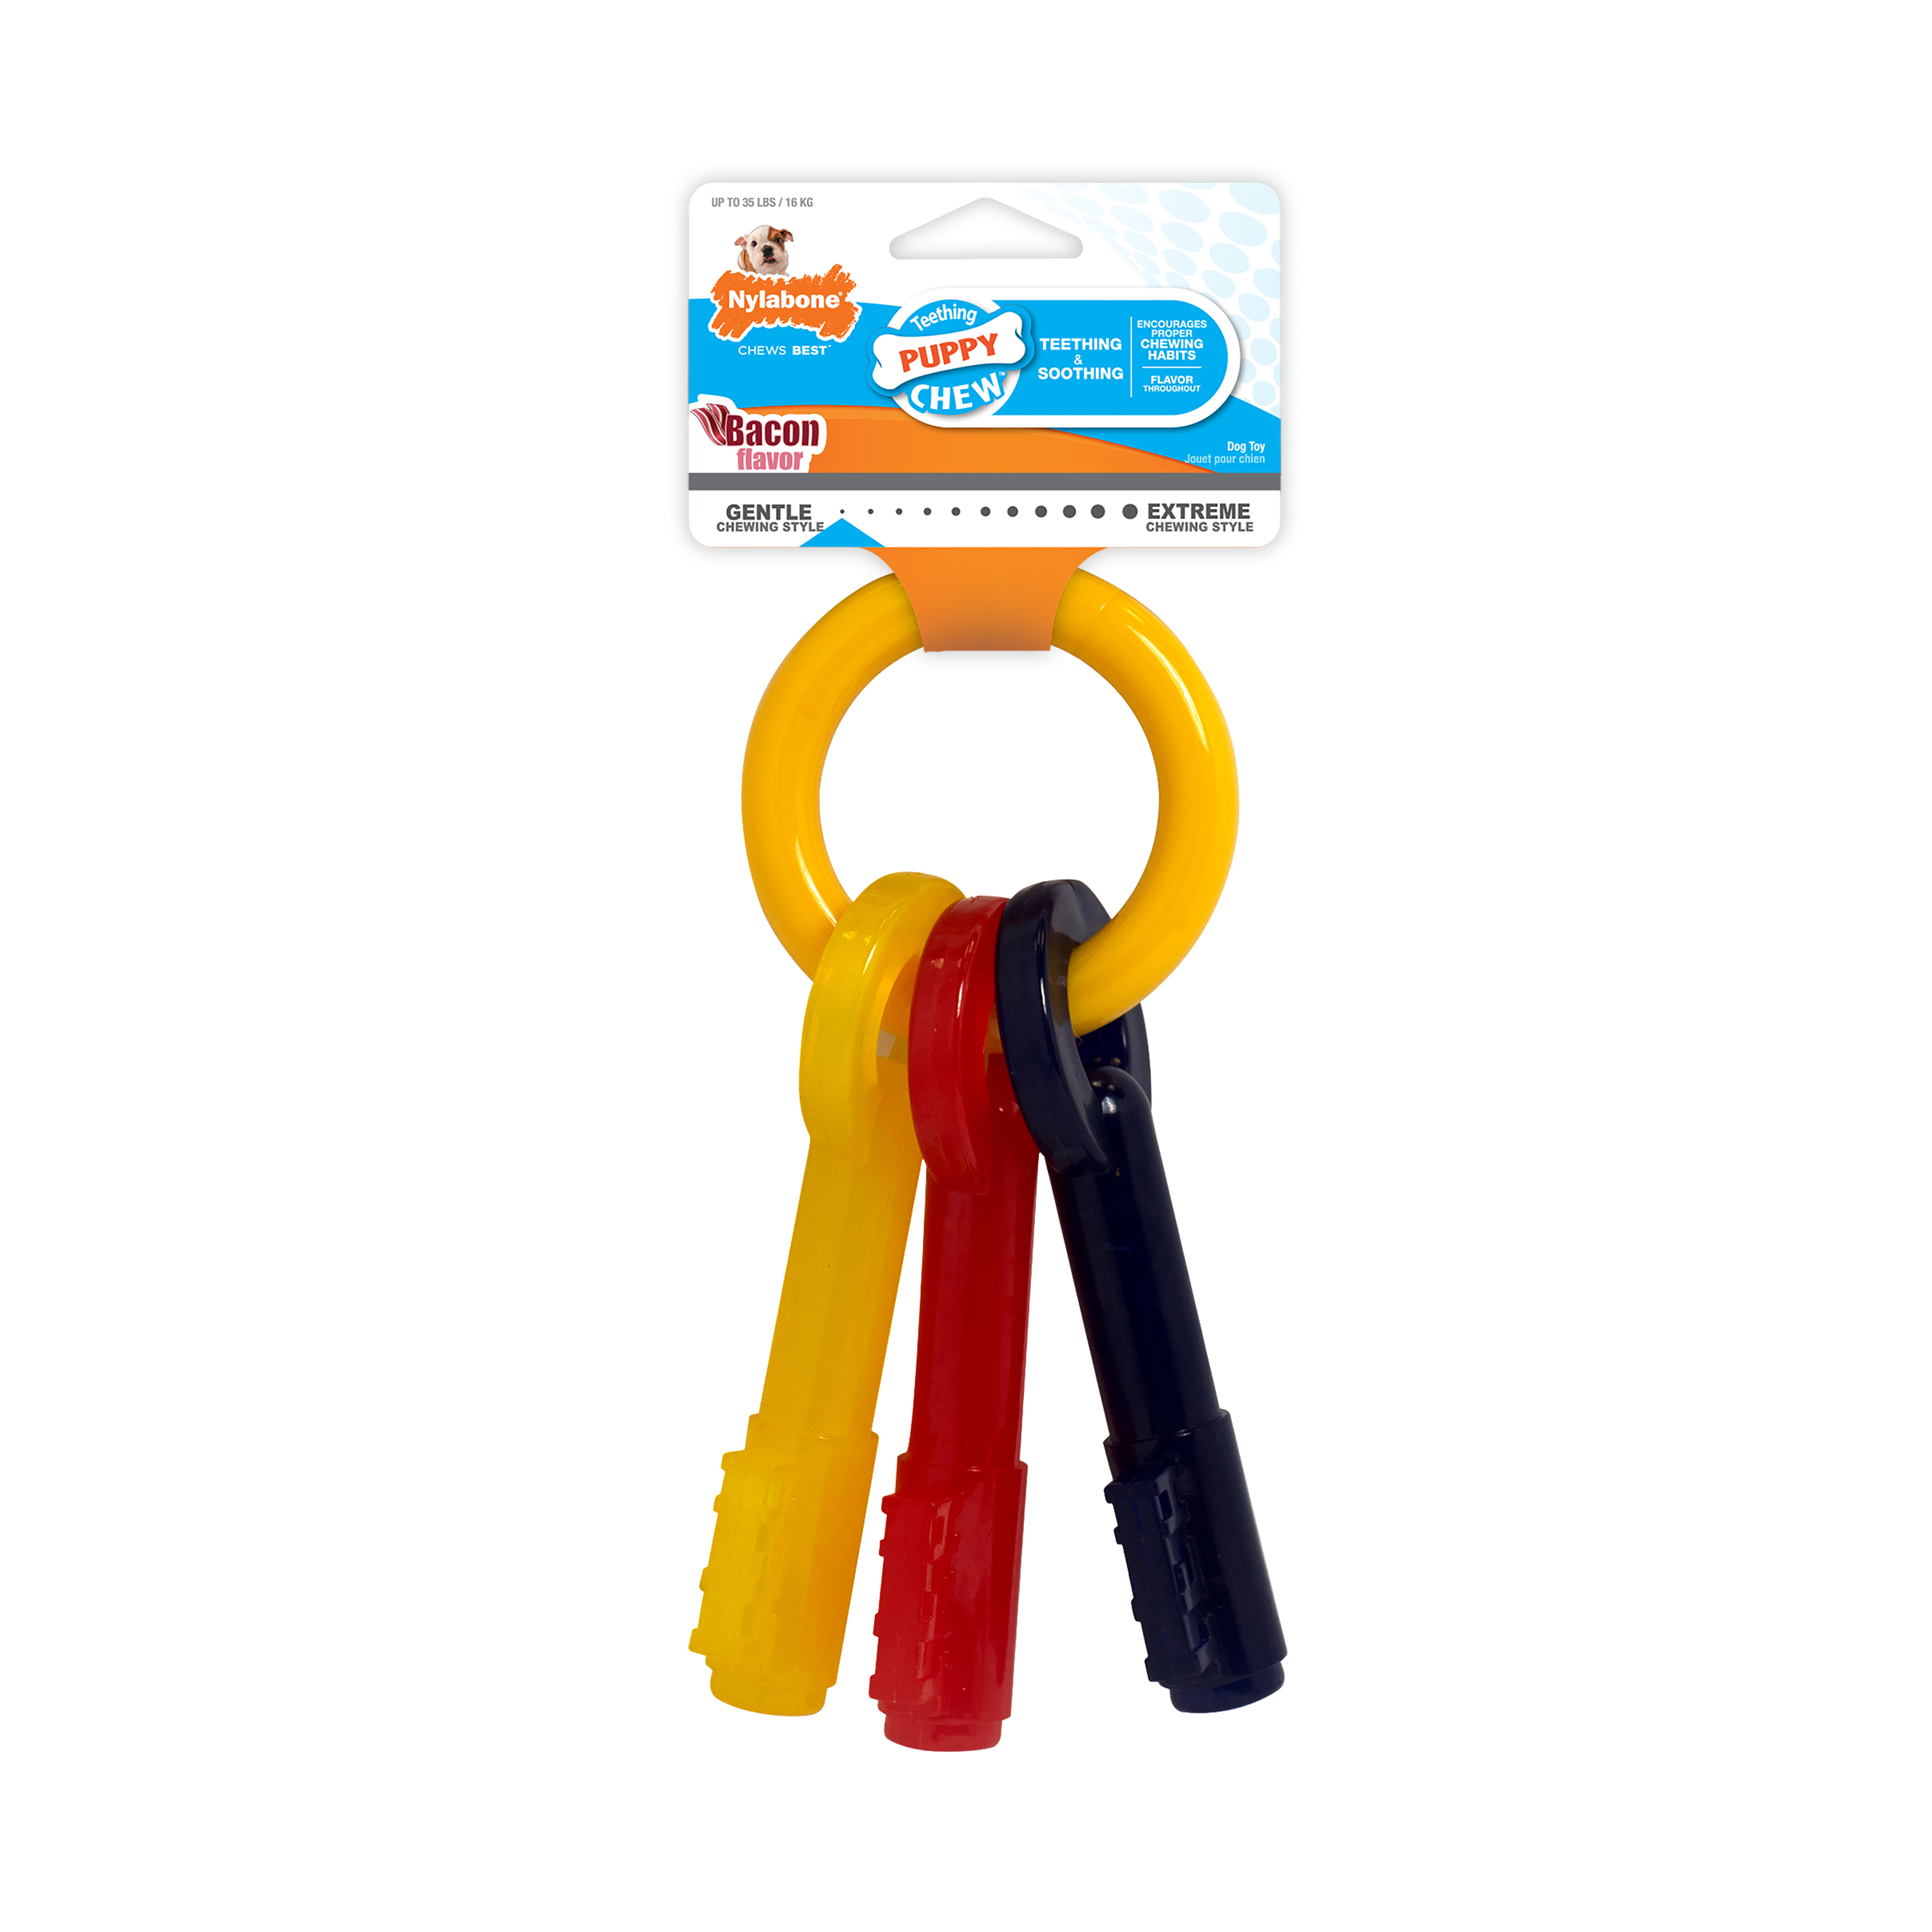 Nylabone Just for Puppies Teething Chew Toy Keys Bacon Medium/Wolf (1 Count) - image 1 of 7